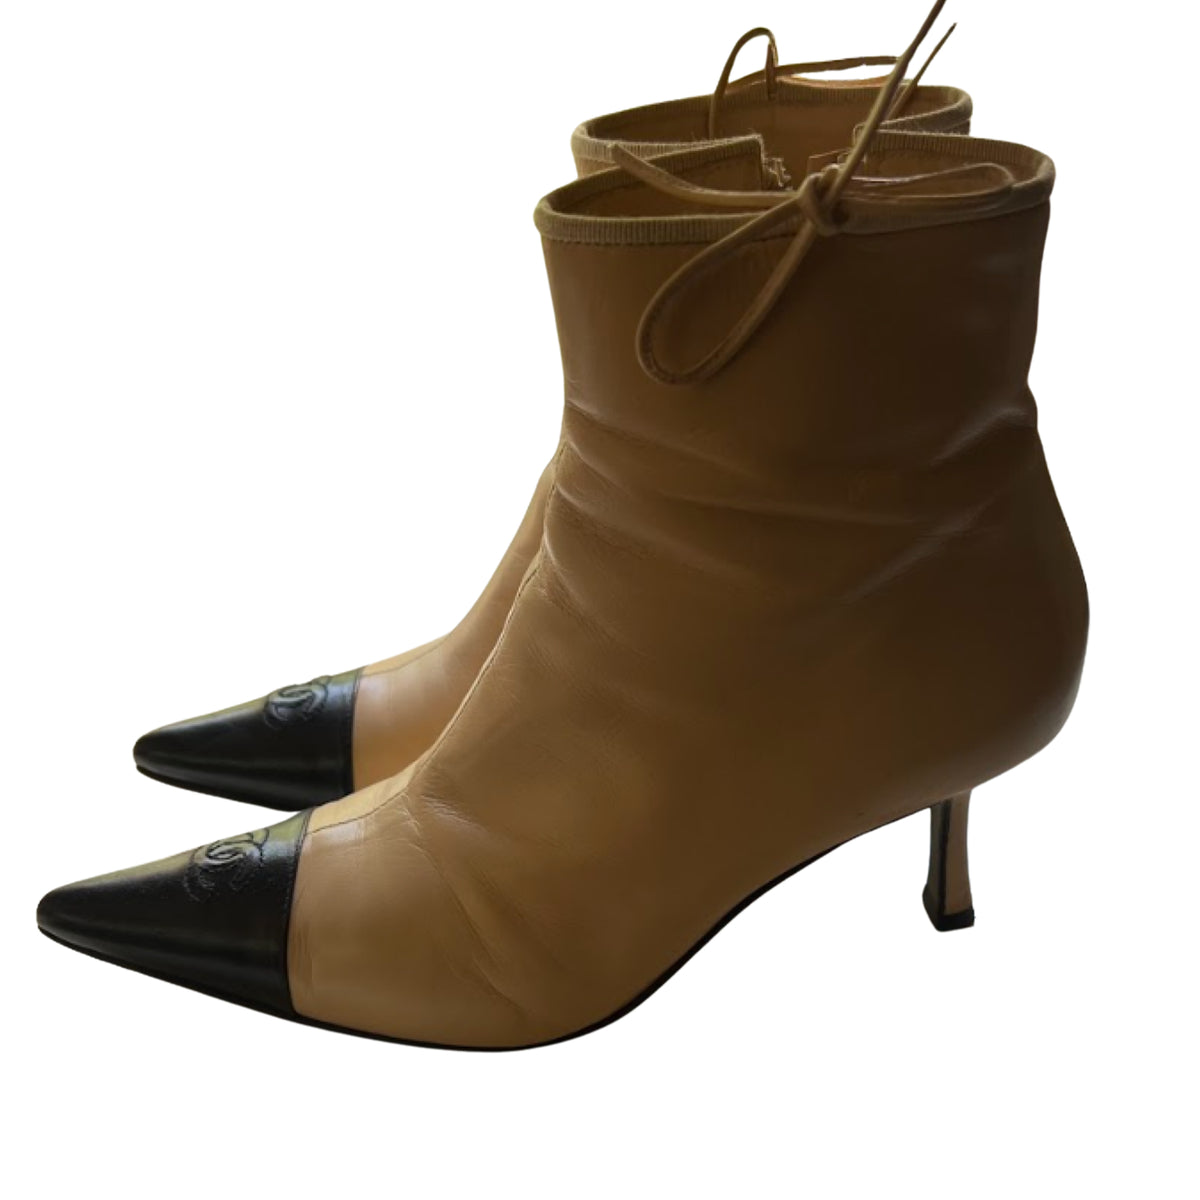 CHANEL Tan and Black Pointed Toe Leather Boots | Size 38.5